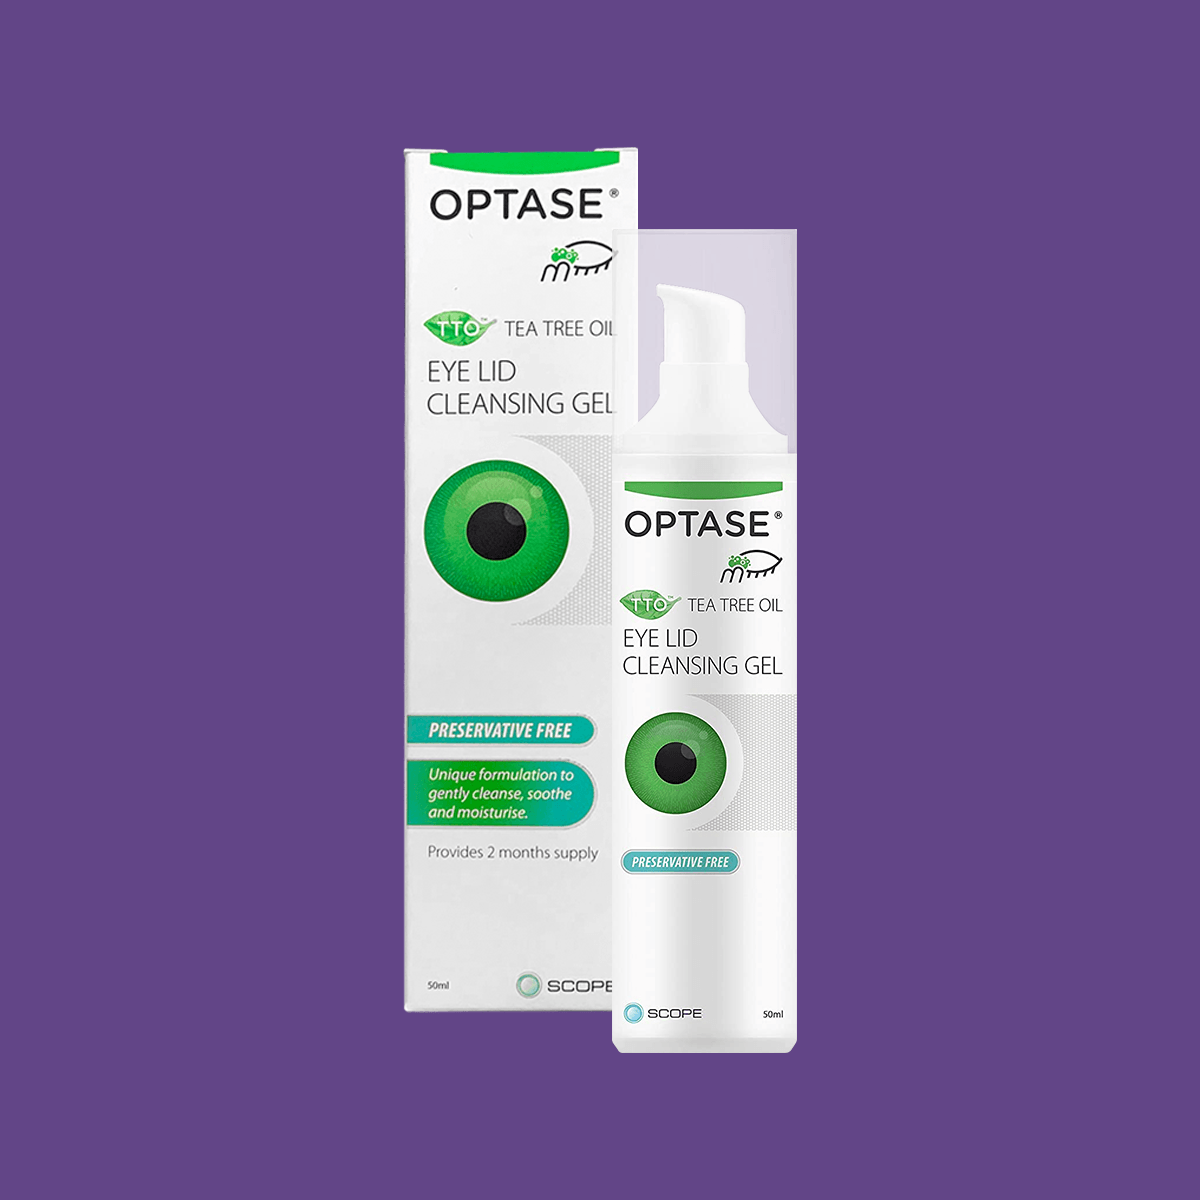 Optase Dry Eye Kit (C) Heat Mask, Cleaning Gel, and Intense Drops - Dryeye Rescue